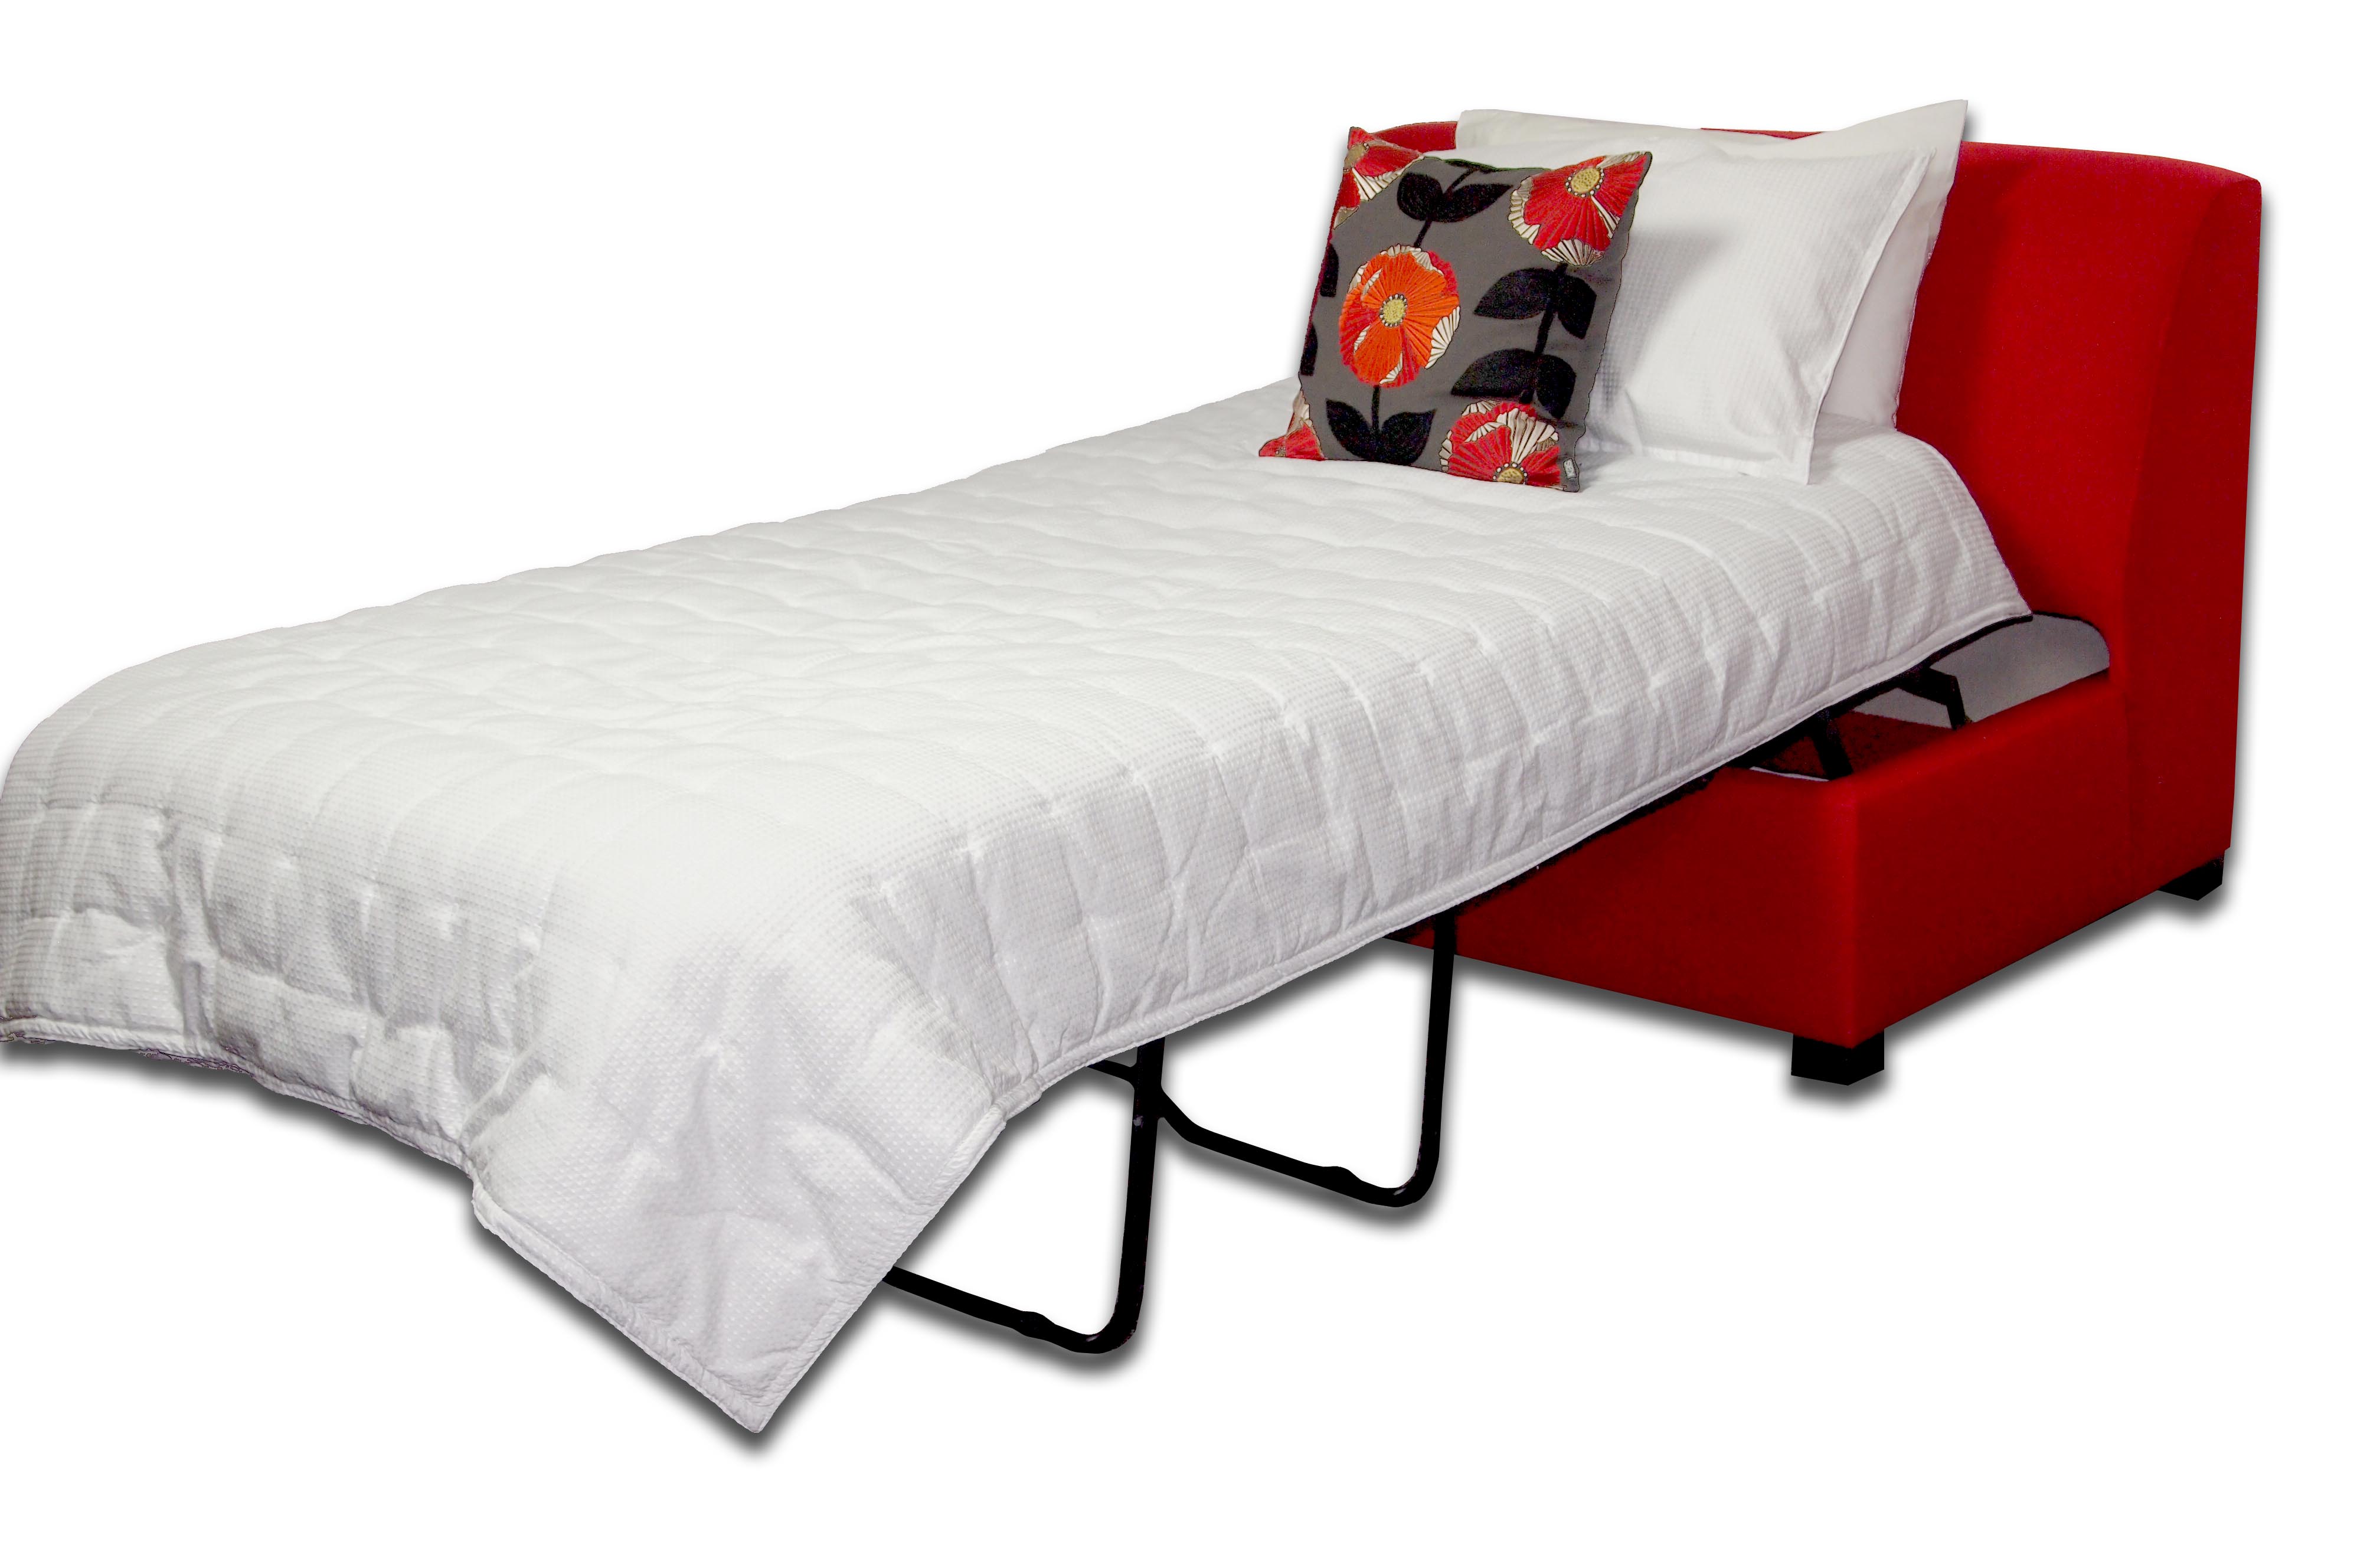 single sofa bed for everyday use